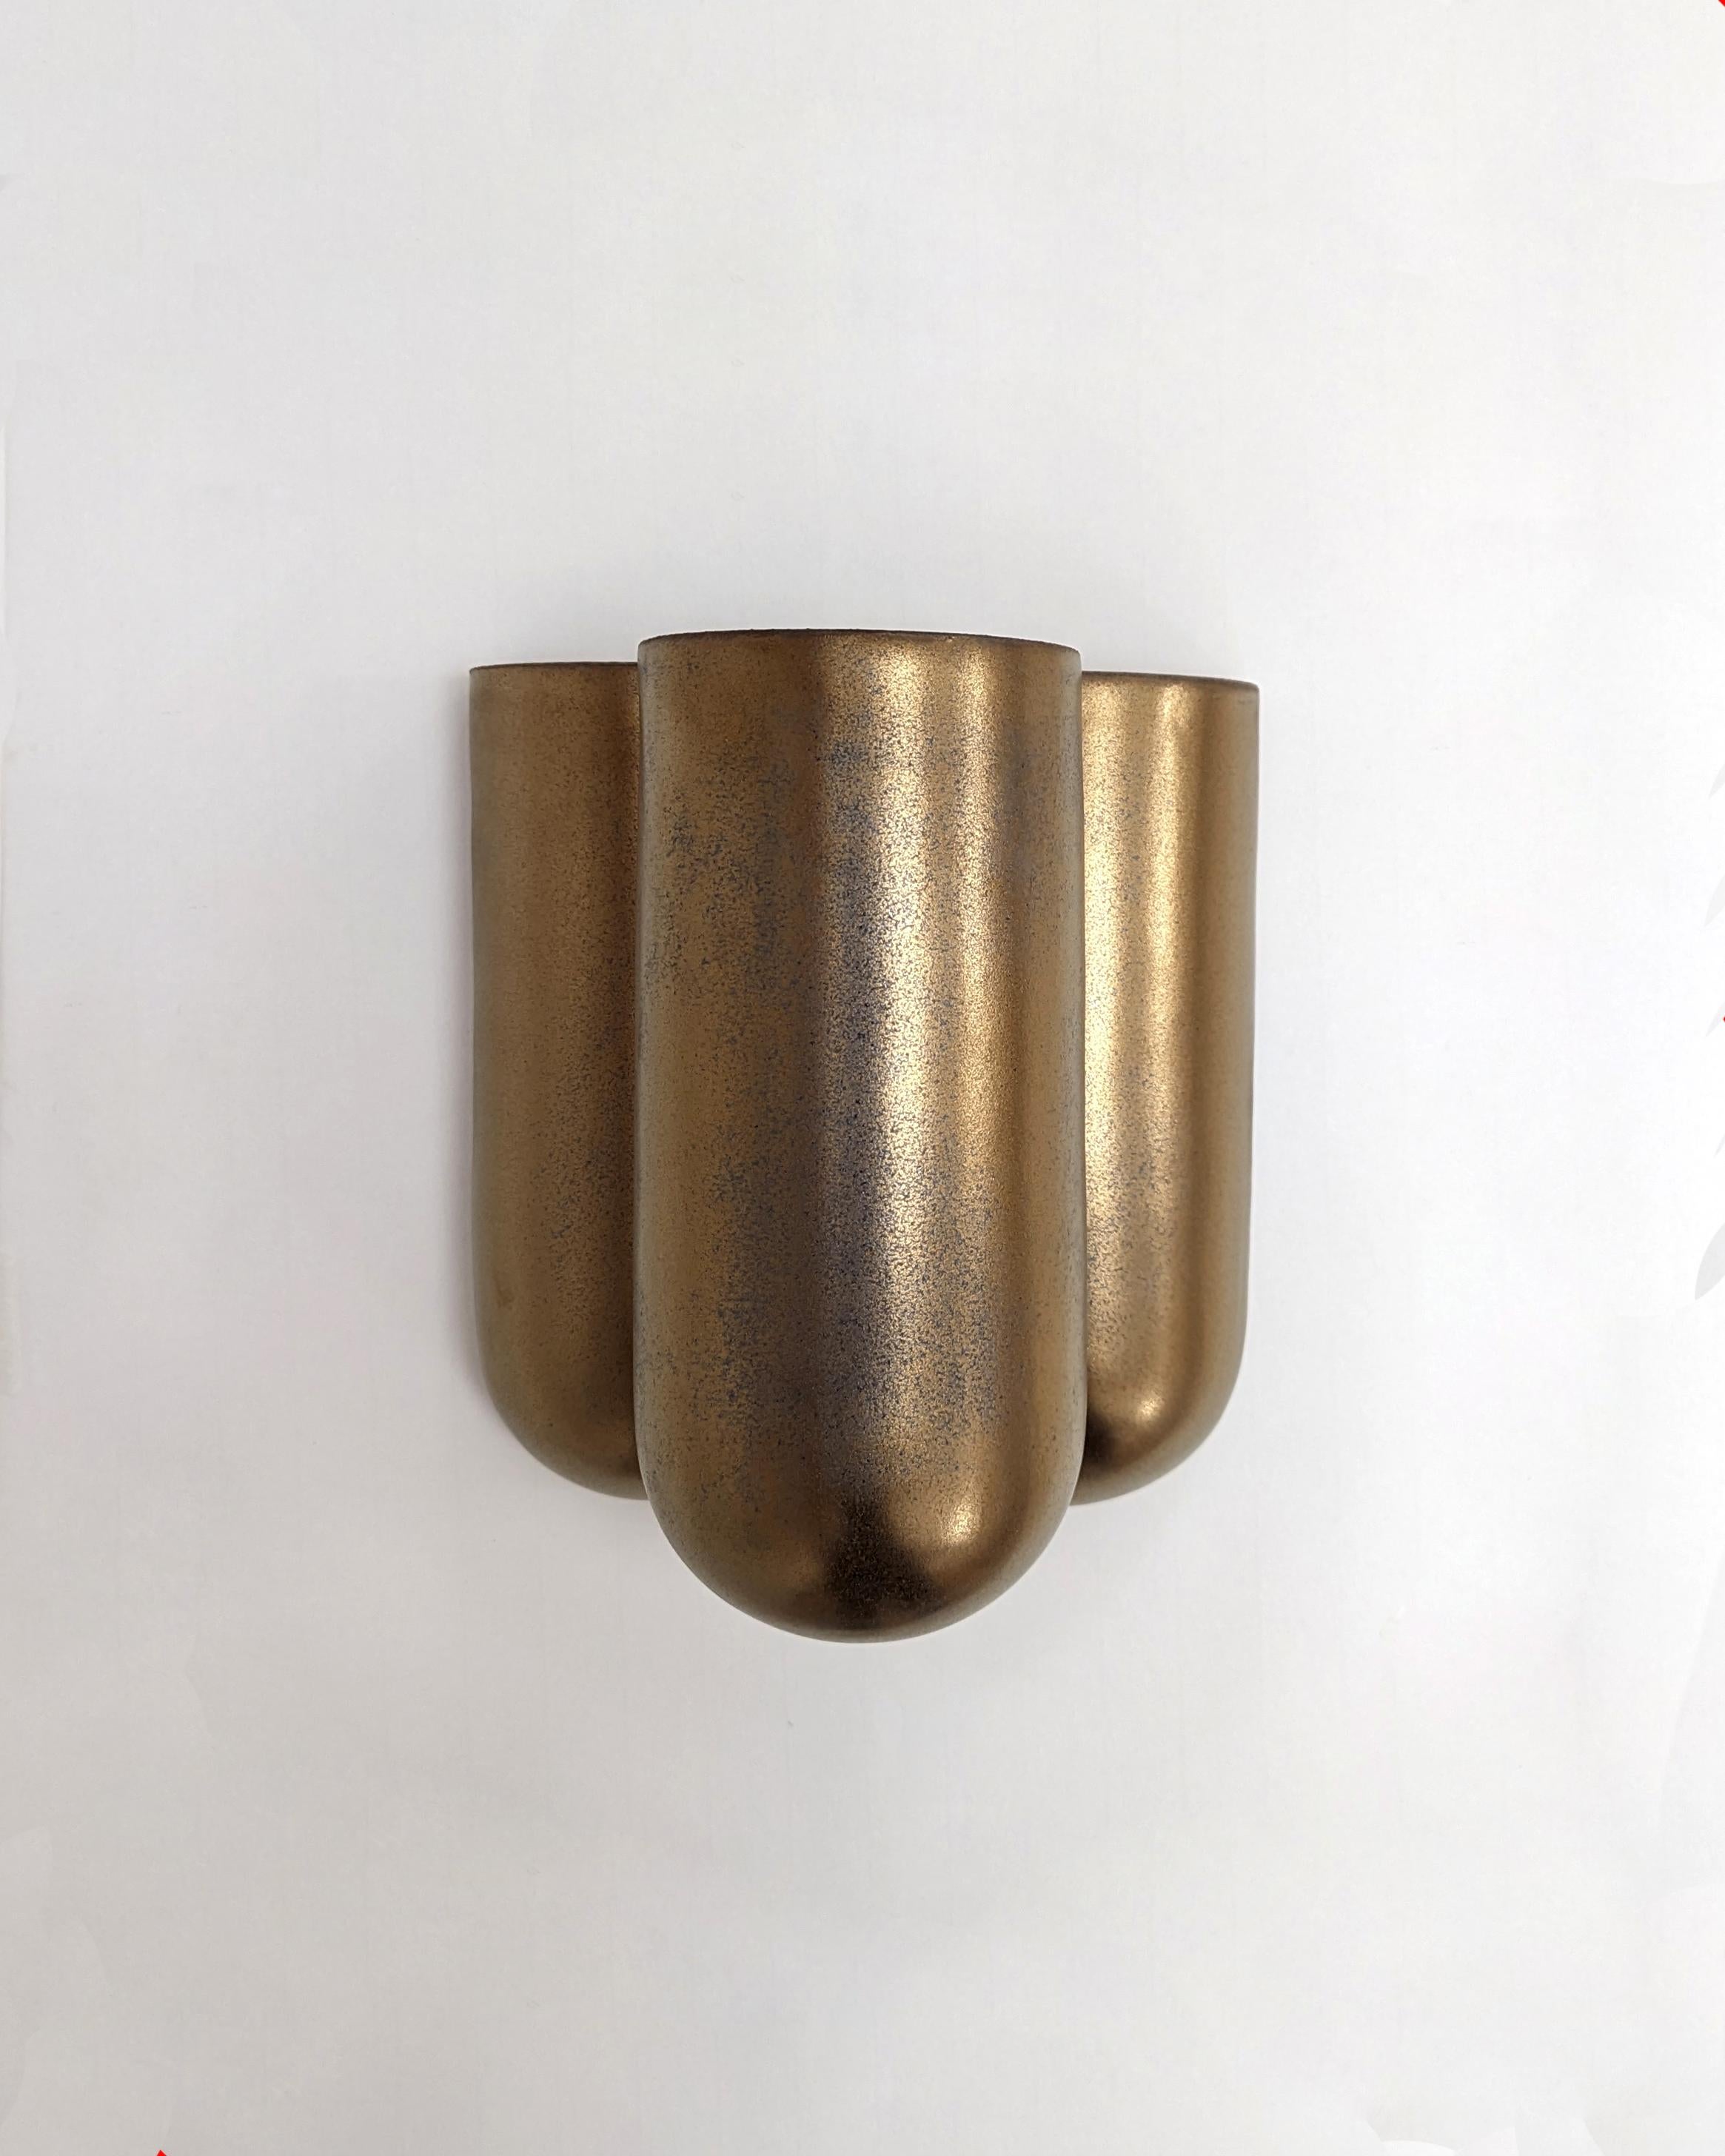 Plus Brillance Blackened Gold Wall Light by Lisa Allegra In New Condition For Sale In Geneve, CH